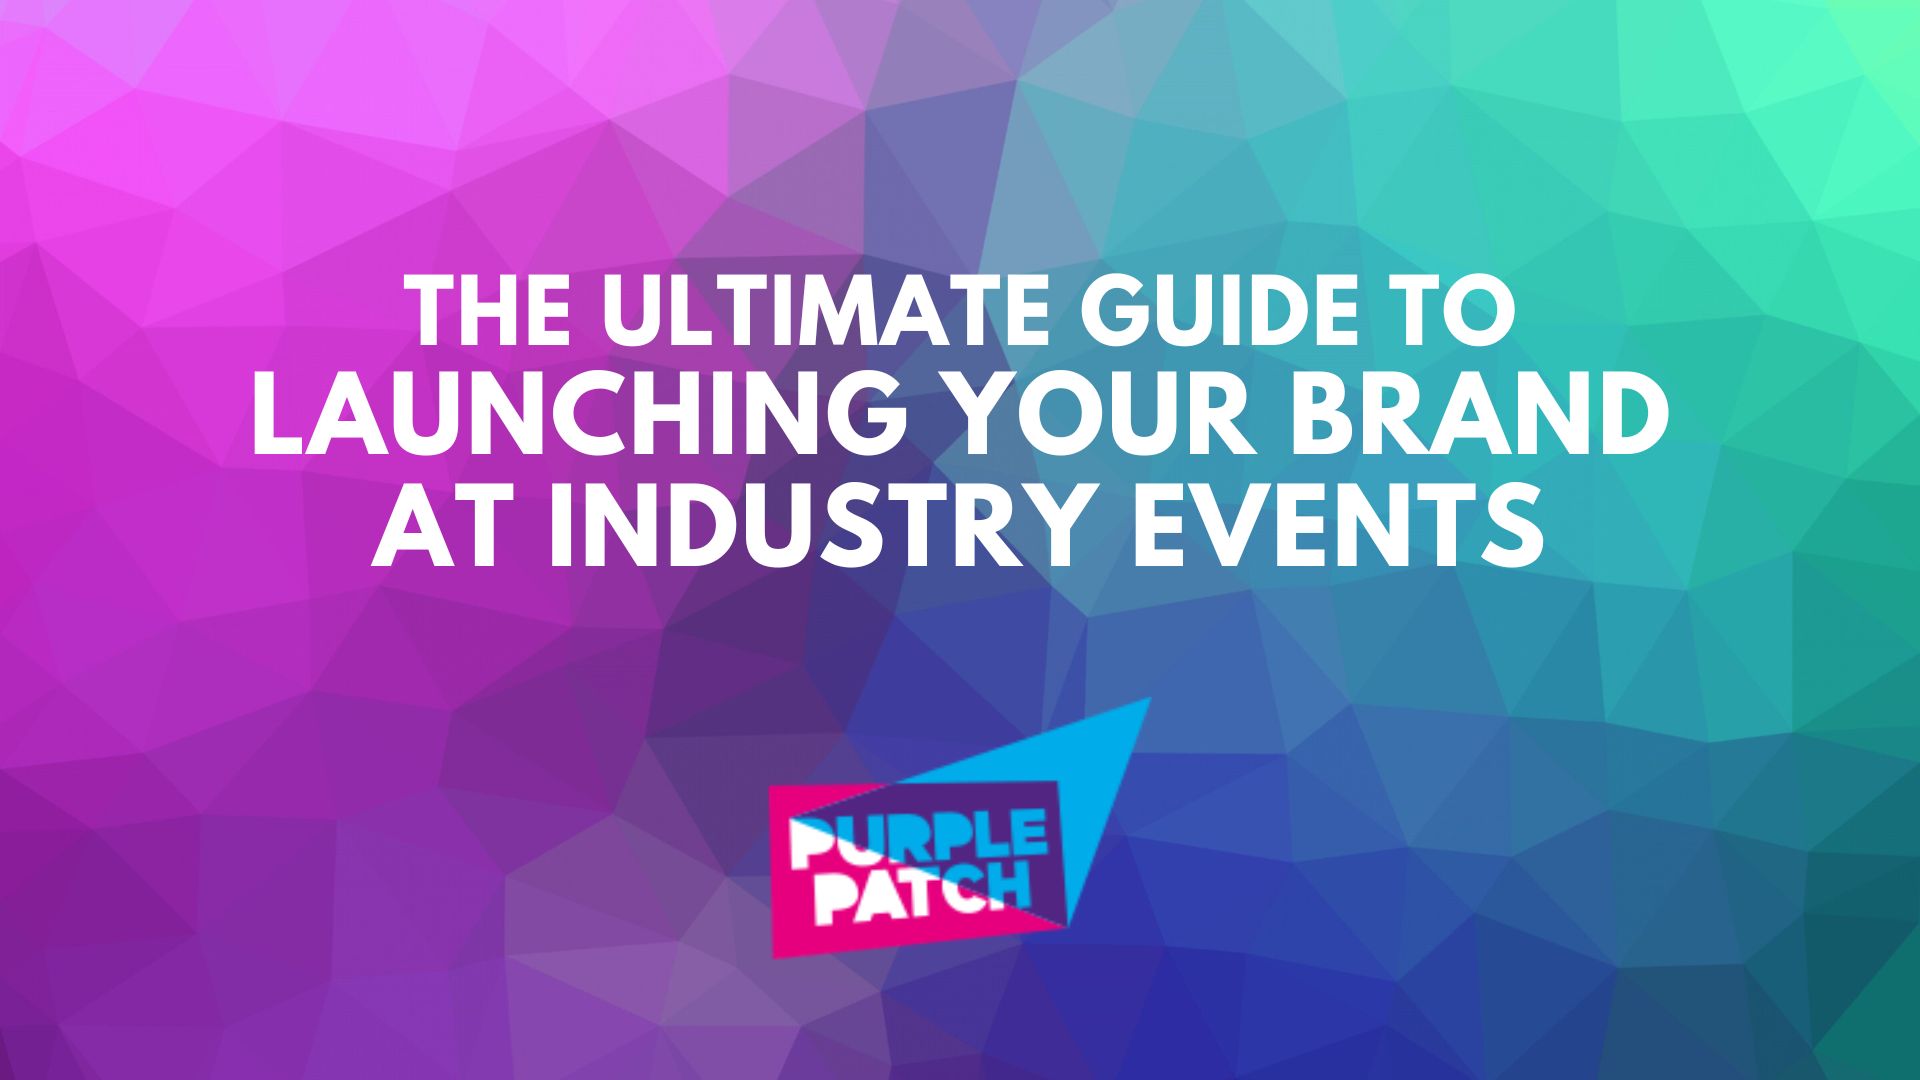 The Ultimate Guide to Launching Your Brand at Industry Events